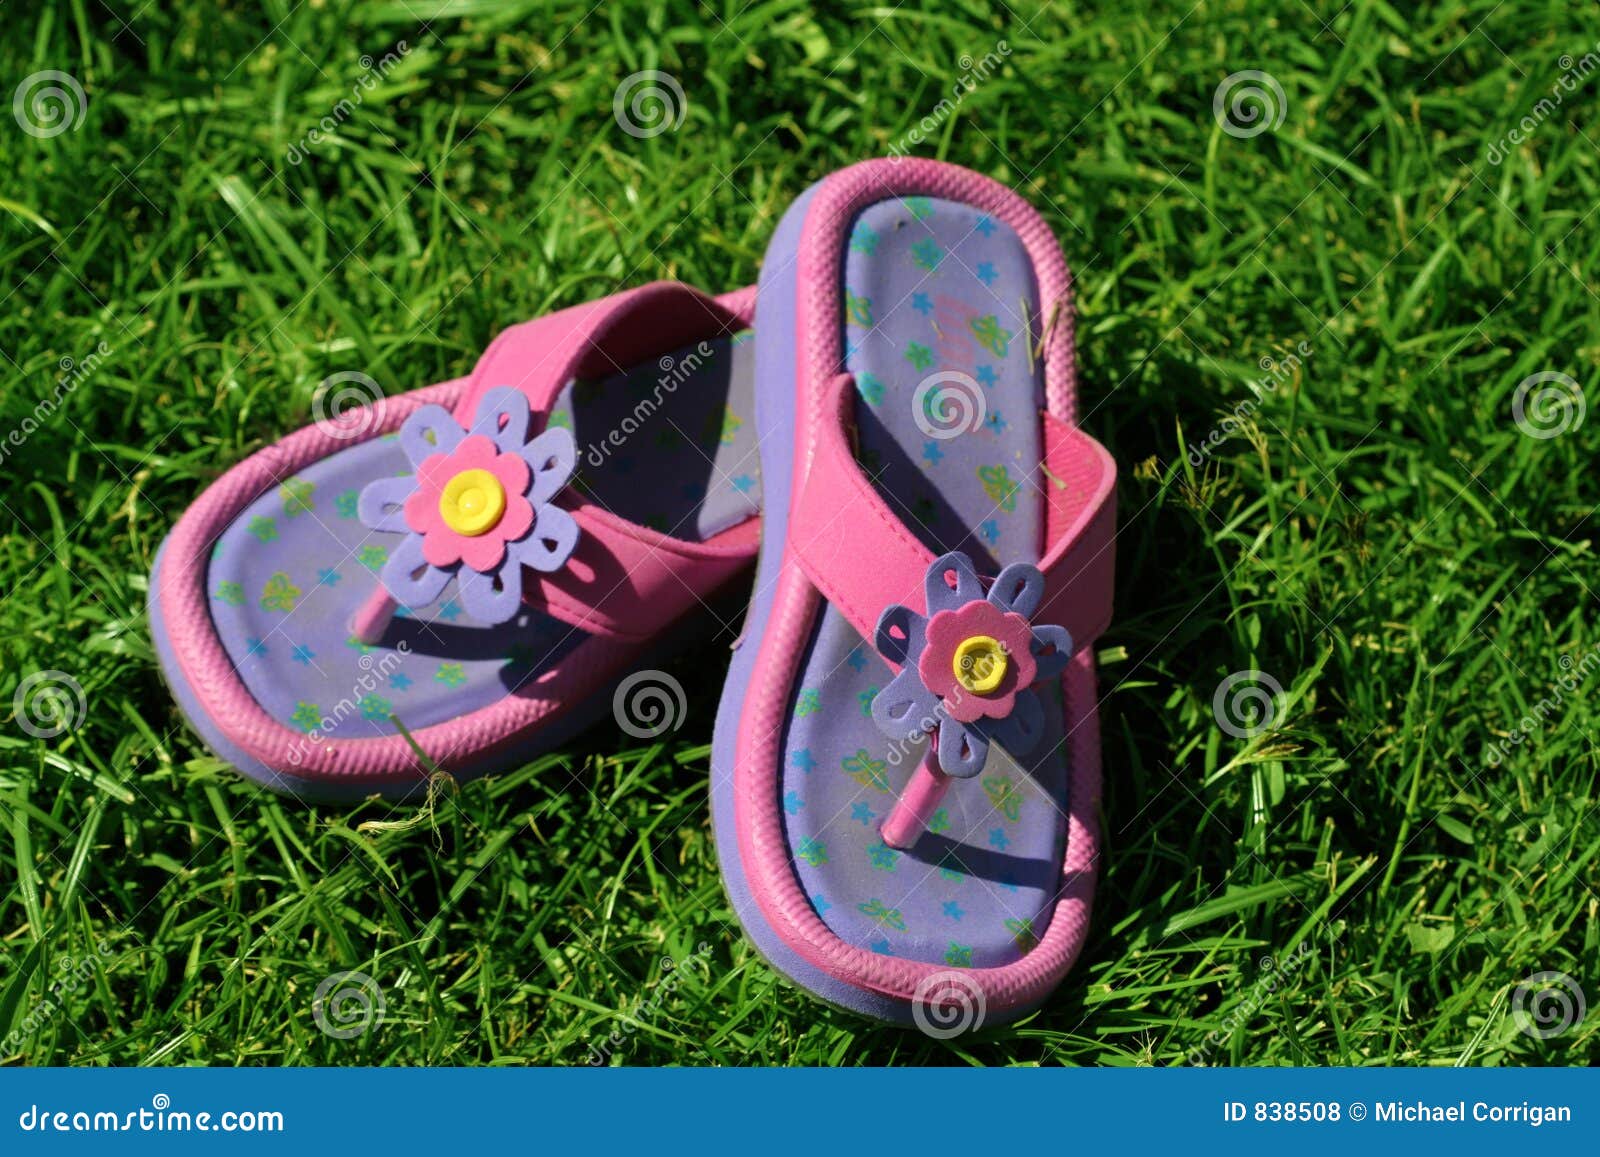 sandals in the grass